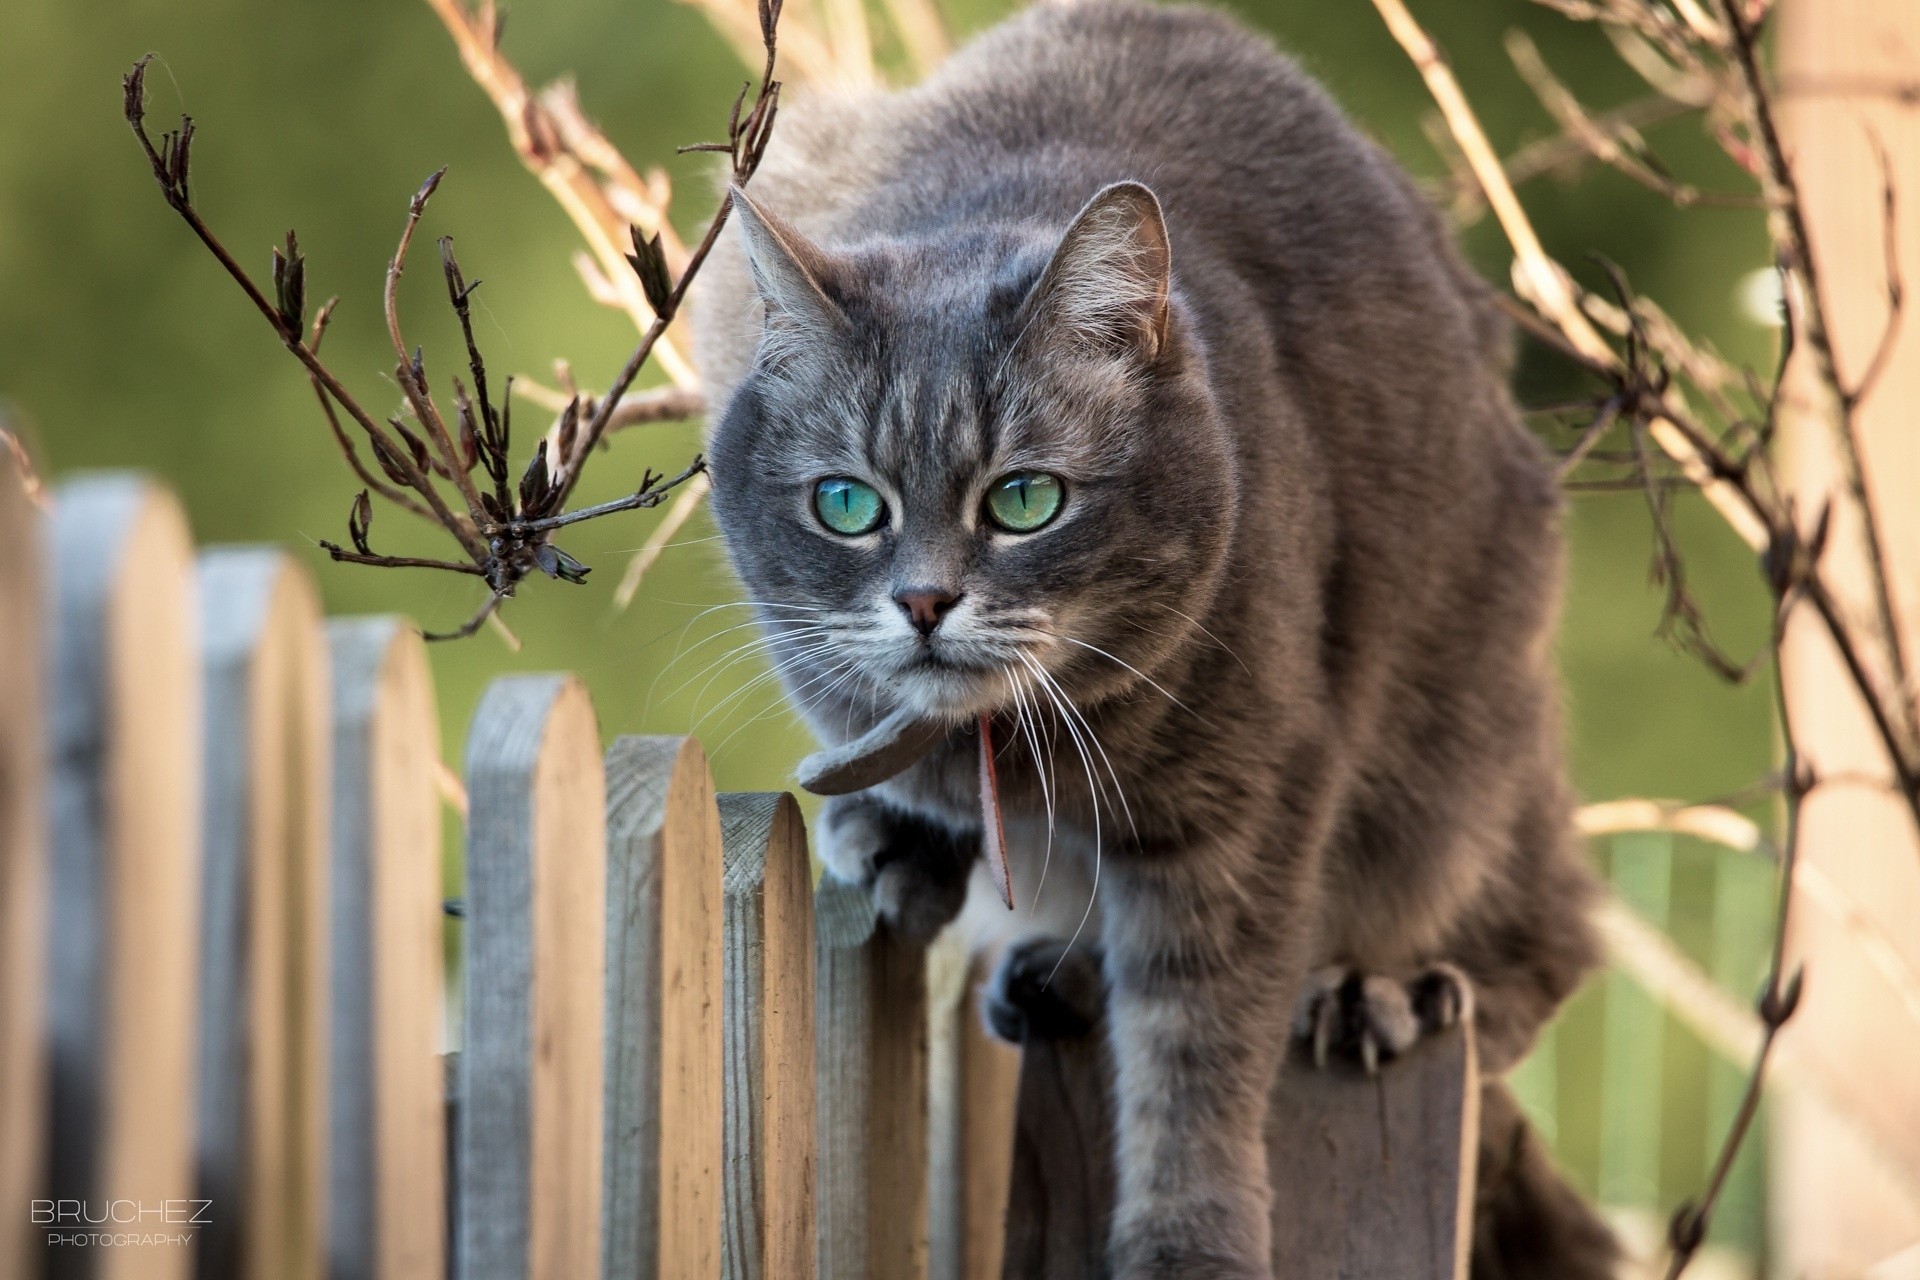 106110 download wallpaper animals, cat, muzzle, branches, fence screensavers and pictures for free